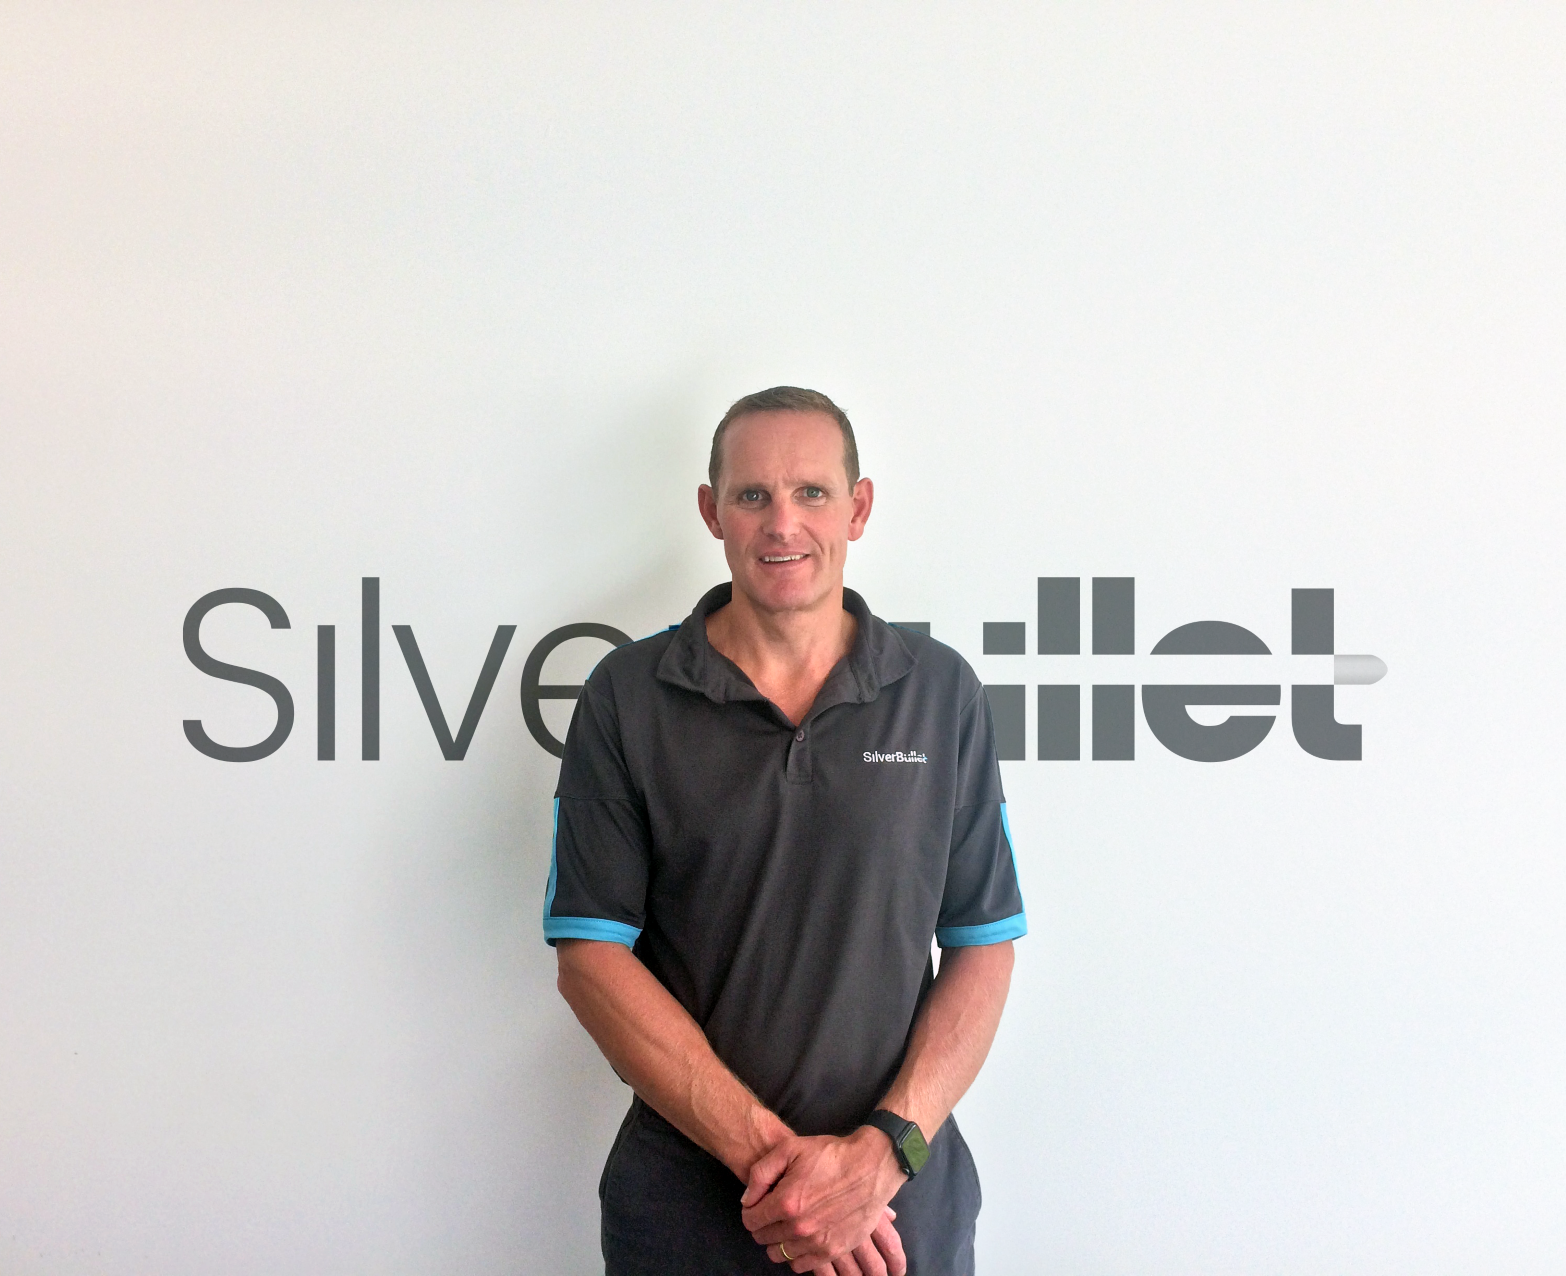 Independent Motor Dealers Association appoints SilverBullet as its new ecommerce partner